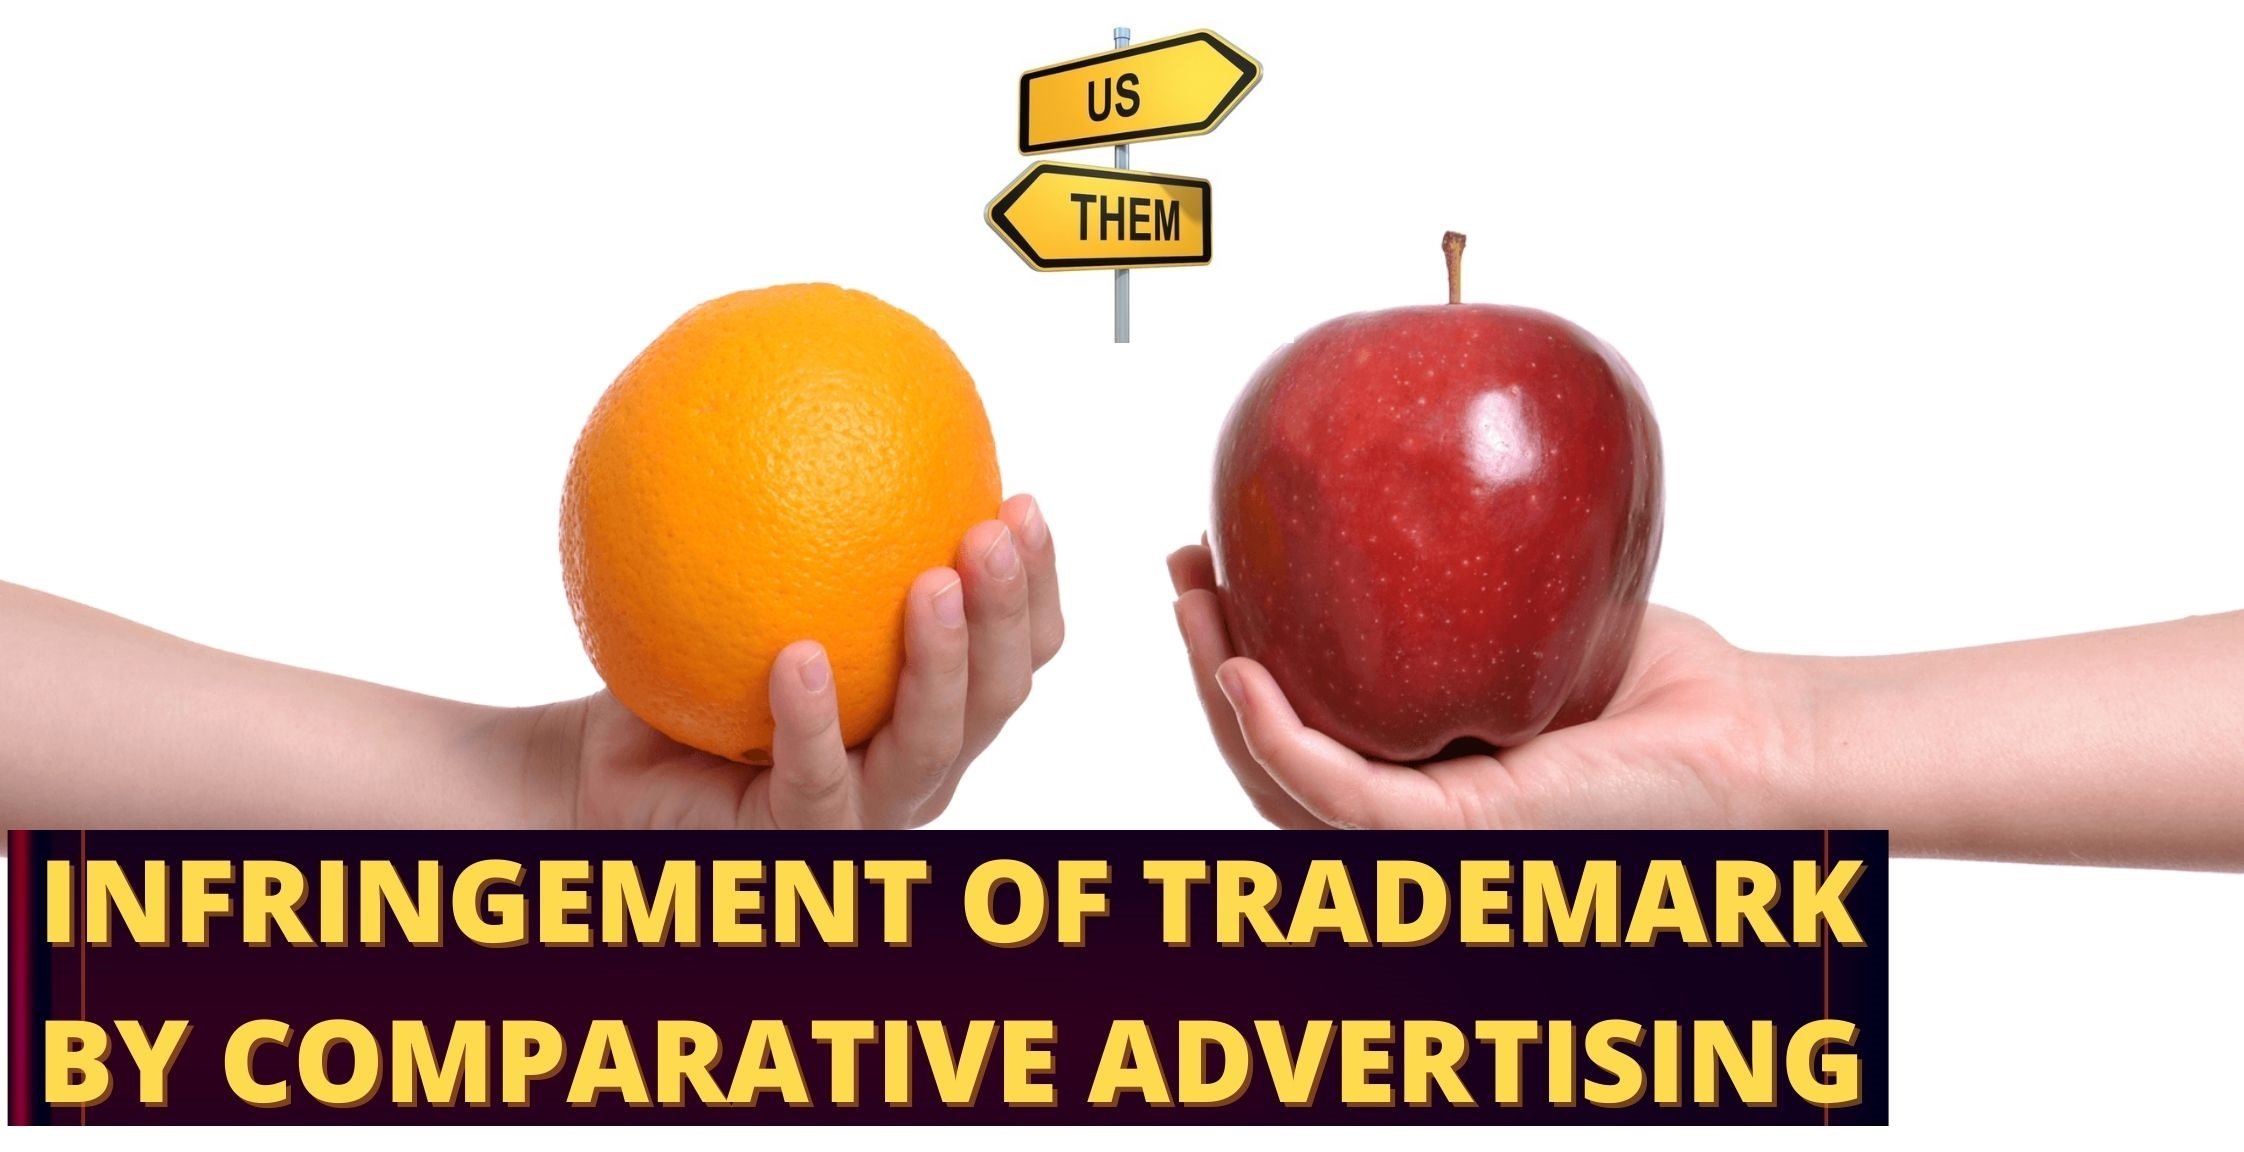 AN ANALYSIS OF THE INFRINGEMENT OF TRADEMARK BY COMPARATIVE ADVERTISING